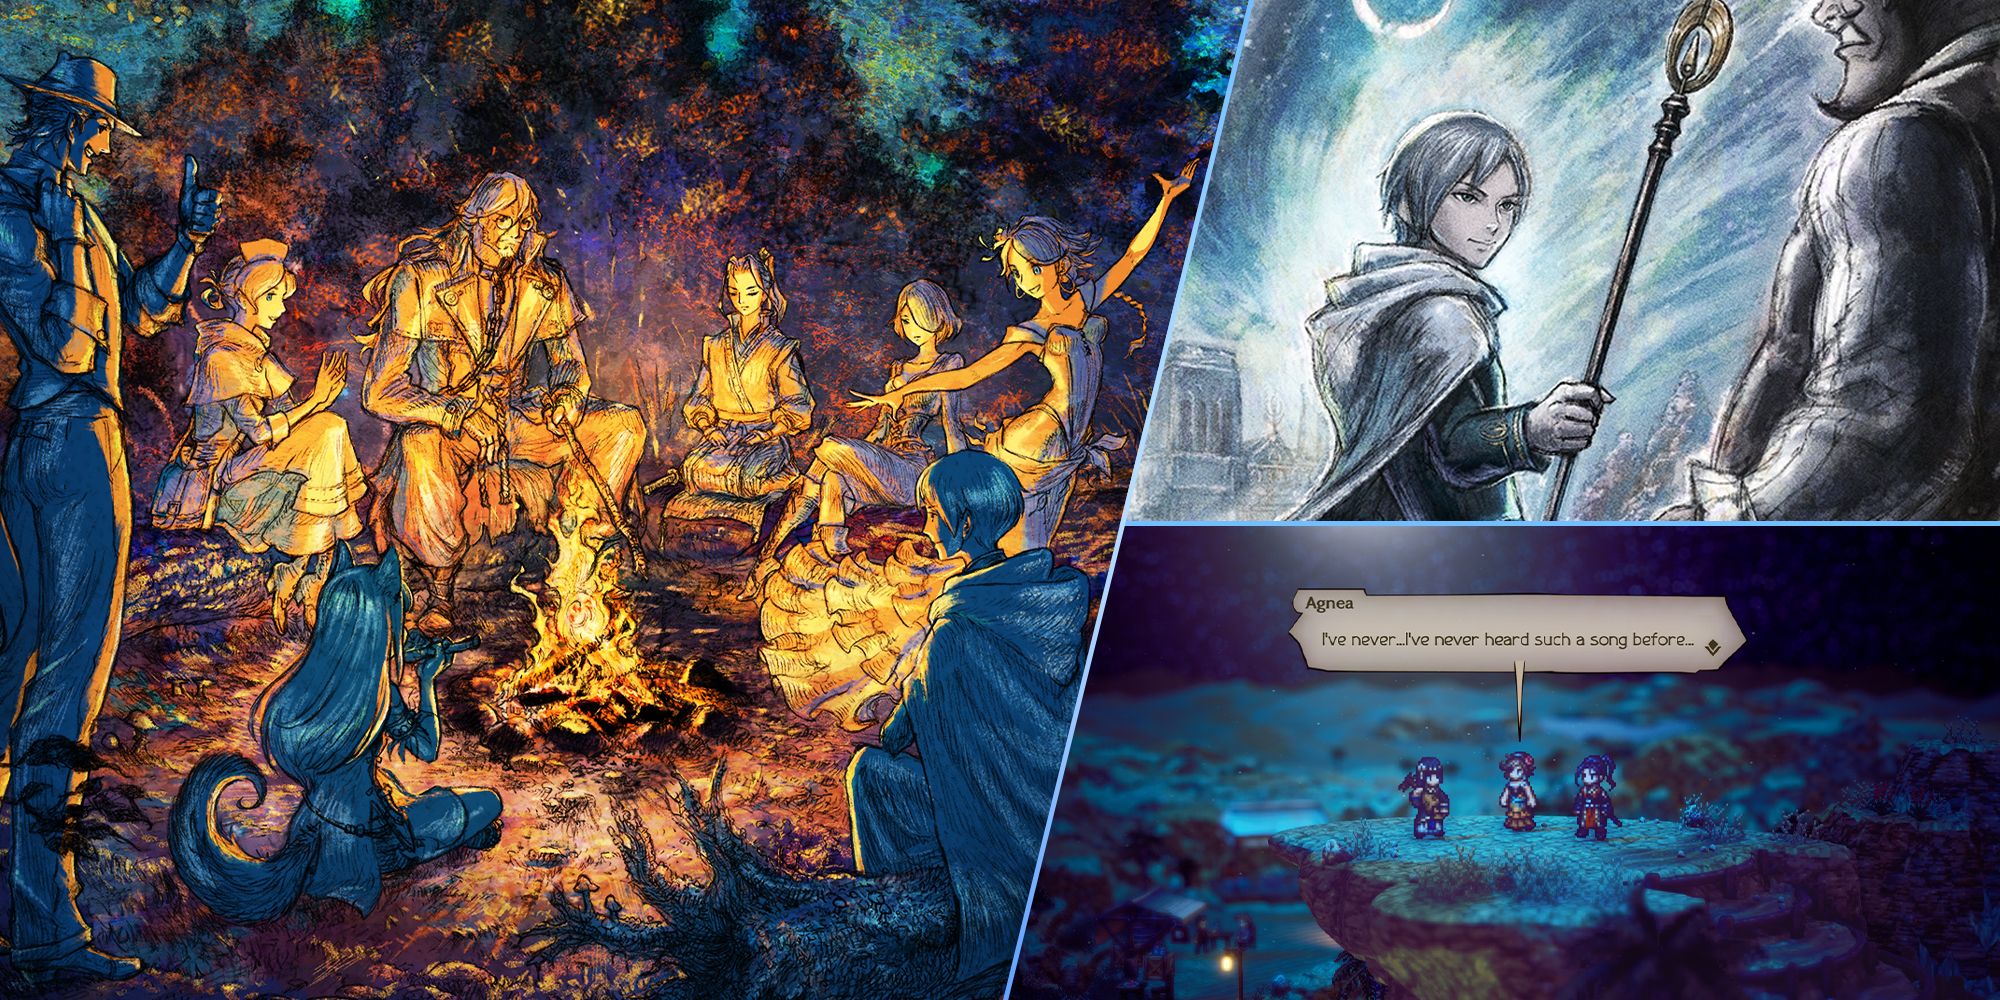 Octopath Traveler 2 Featured Image which shows all 8 heroes around a campfire at night with Temenos's Coerce artwork 